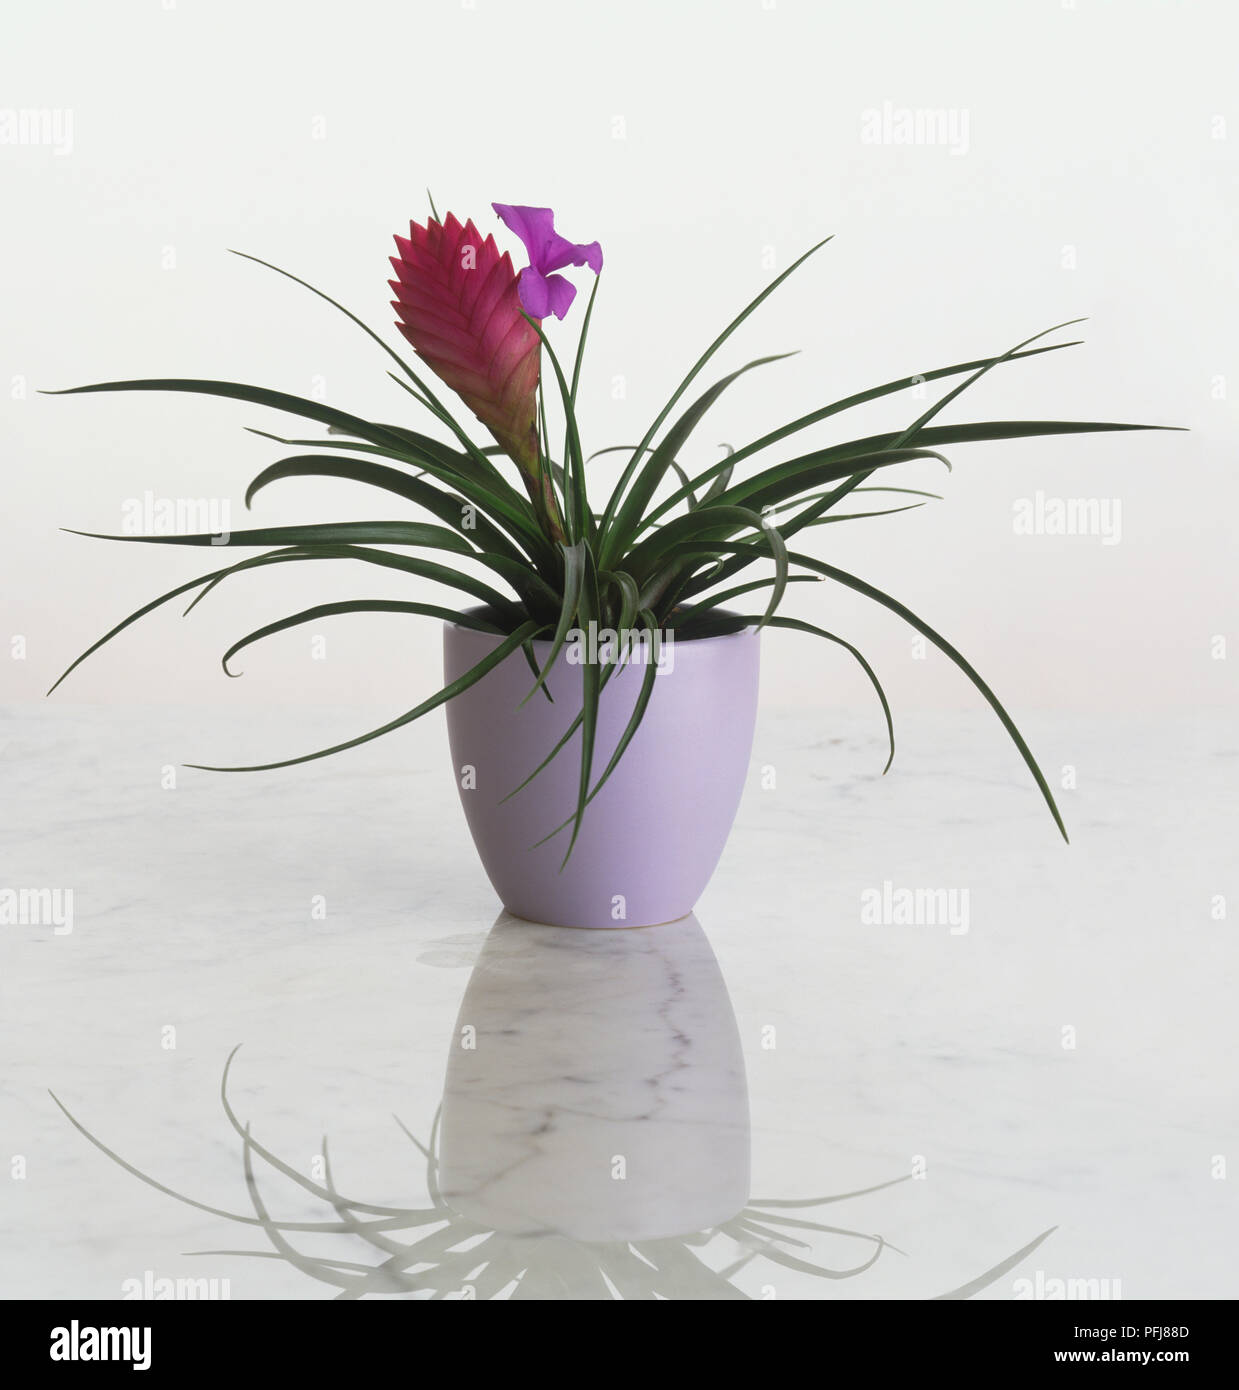 Tillandsia cyanea, flowering Pink Quill plant growing in white ceramic pot. Stock Photo